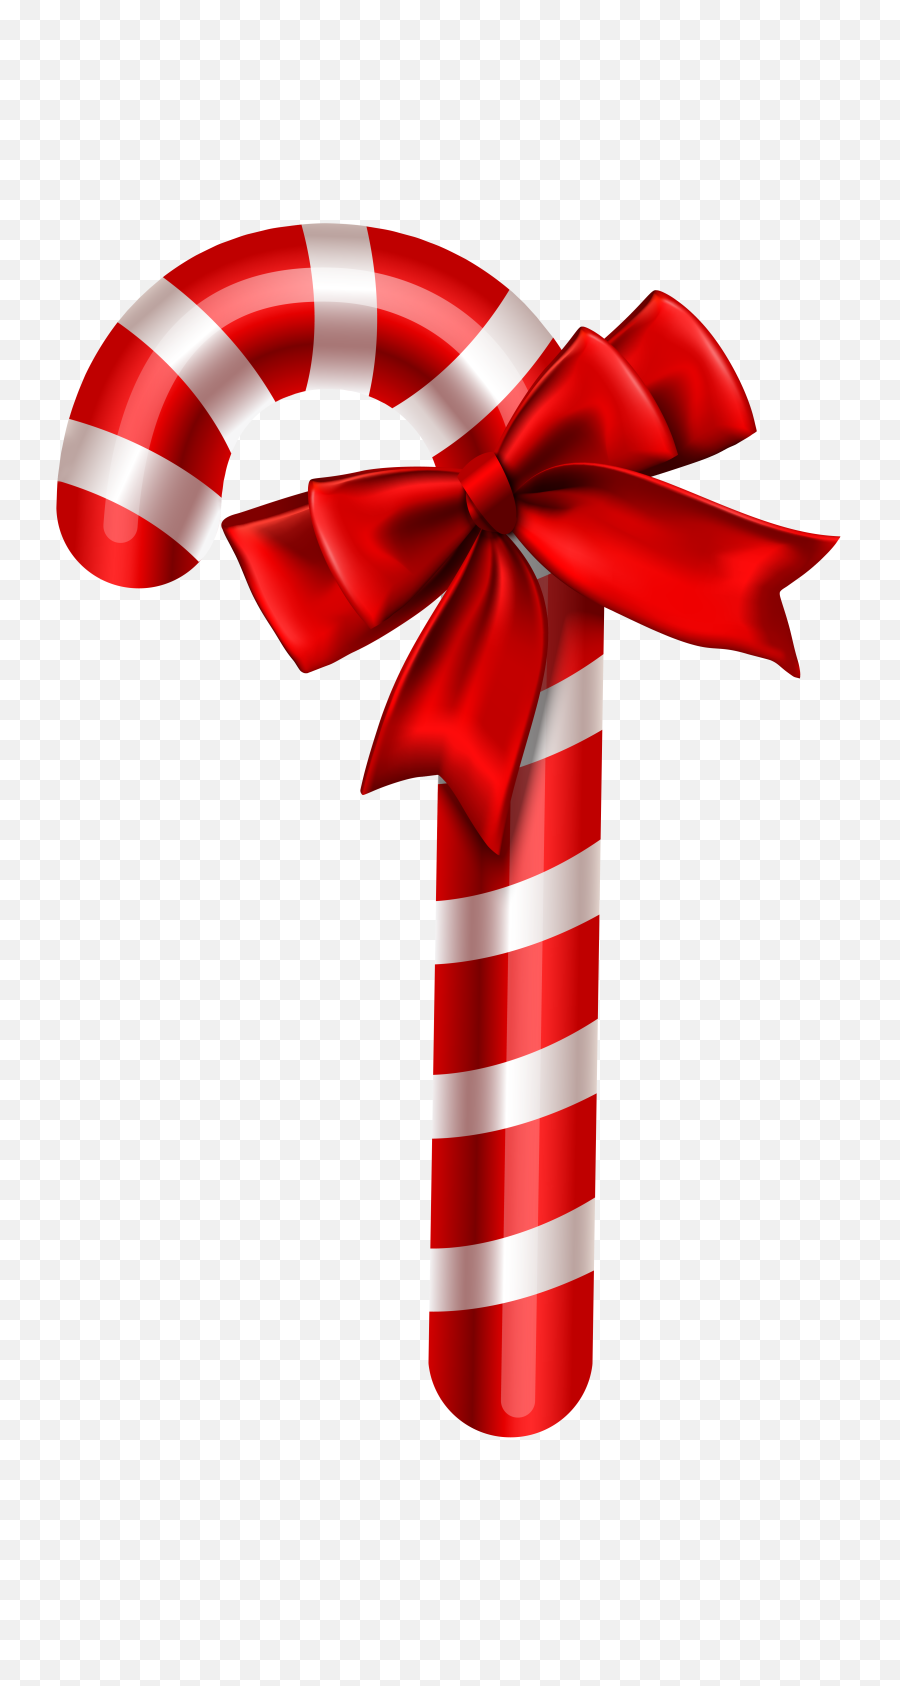 Candy Cane Christmas Ornament Png - Christmas Ornaments Candy Cane,Candy Cane Transparent Background